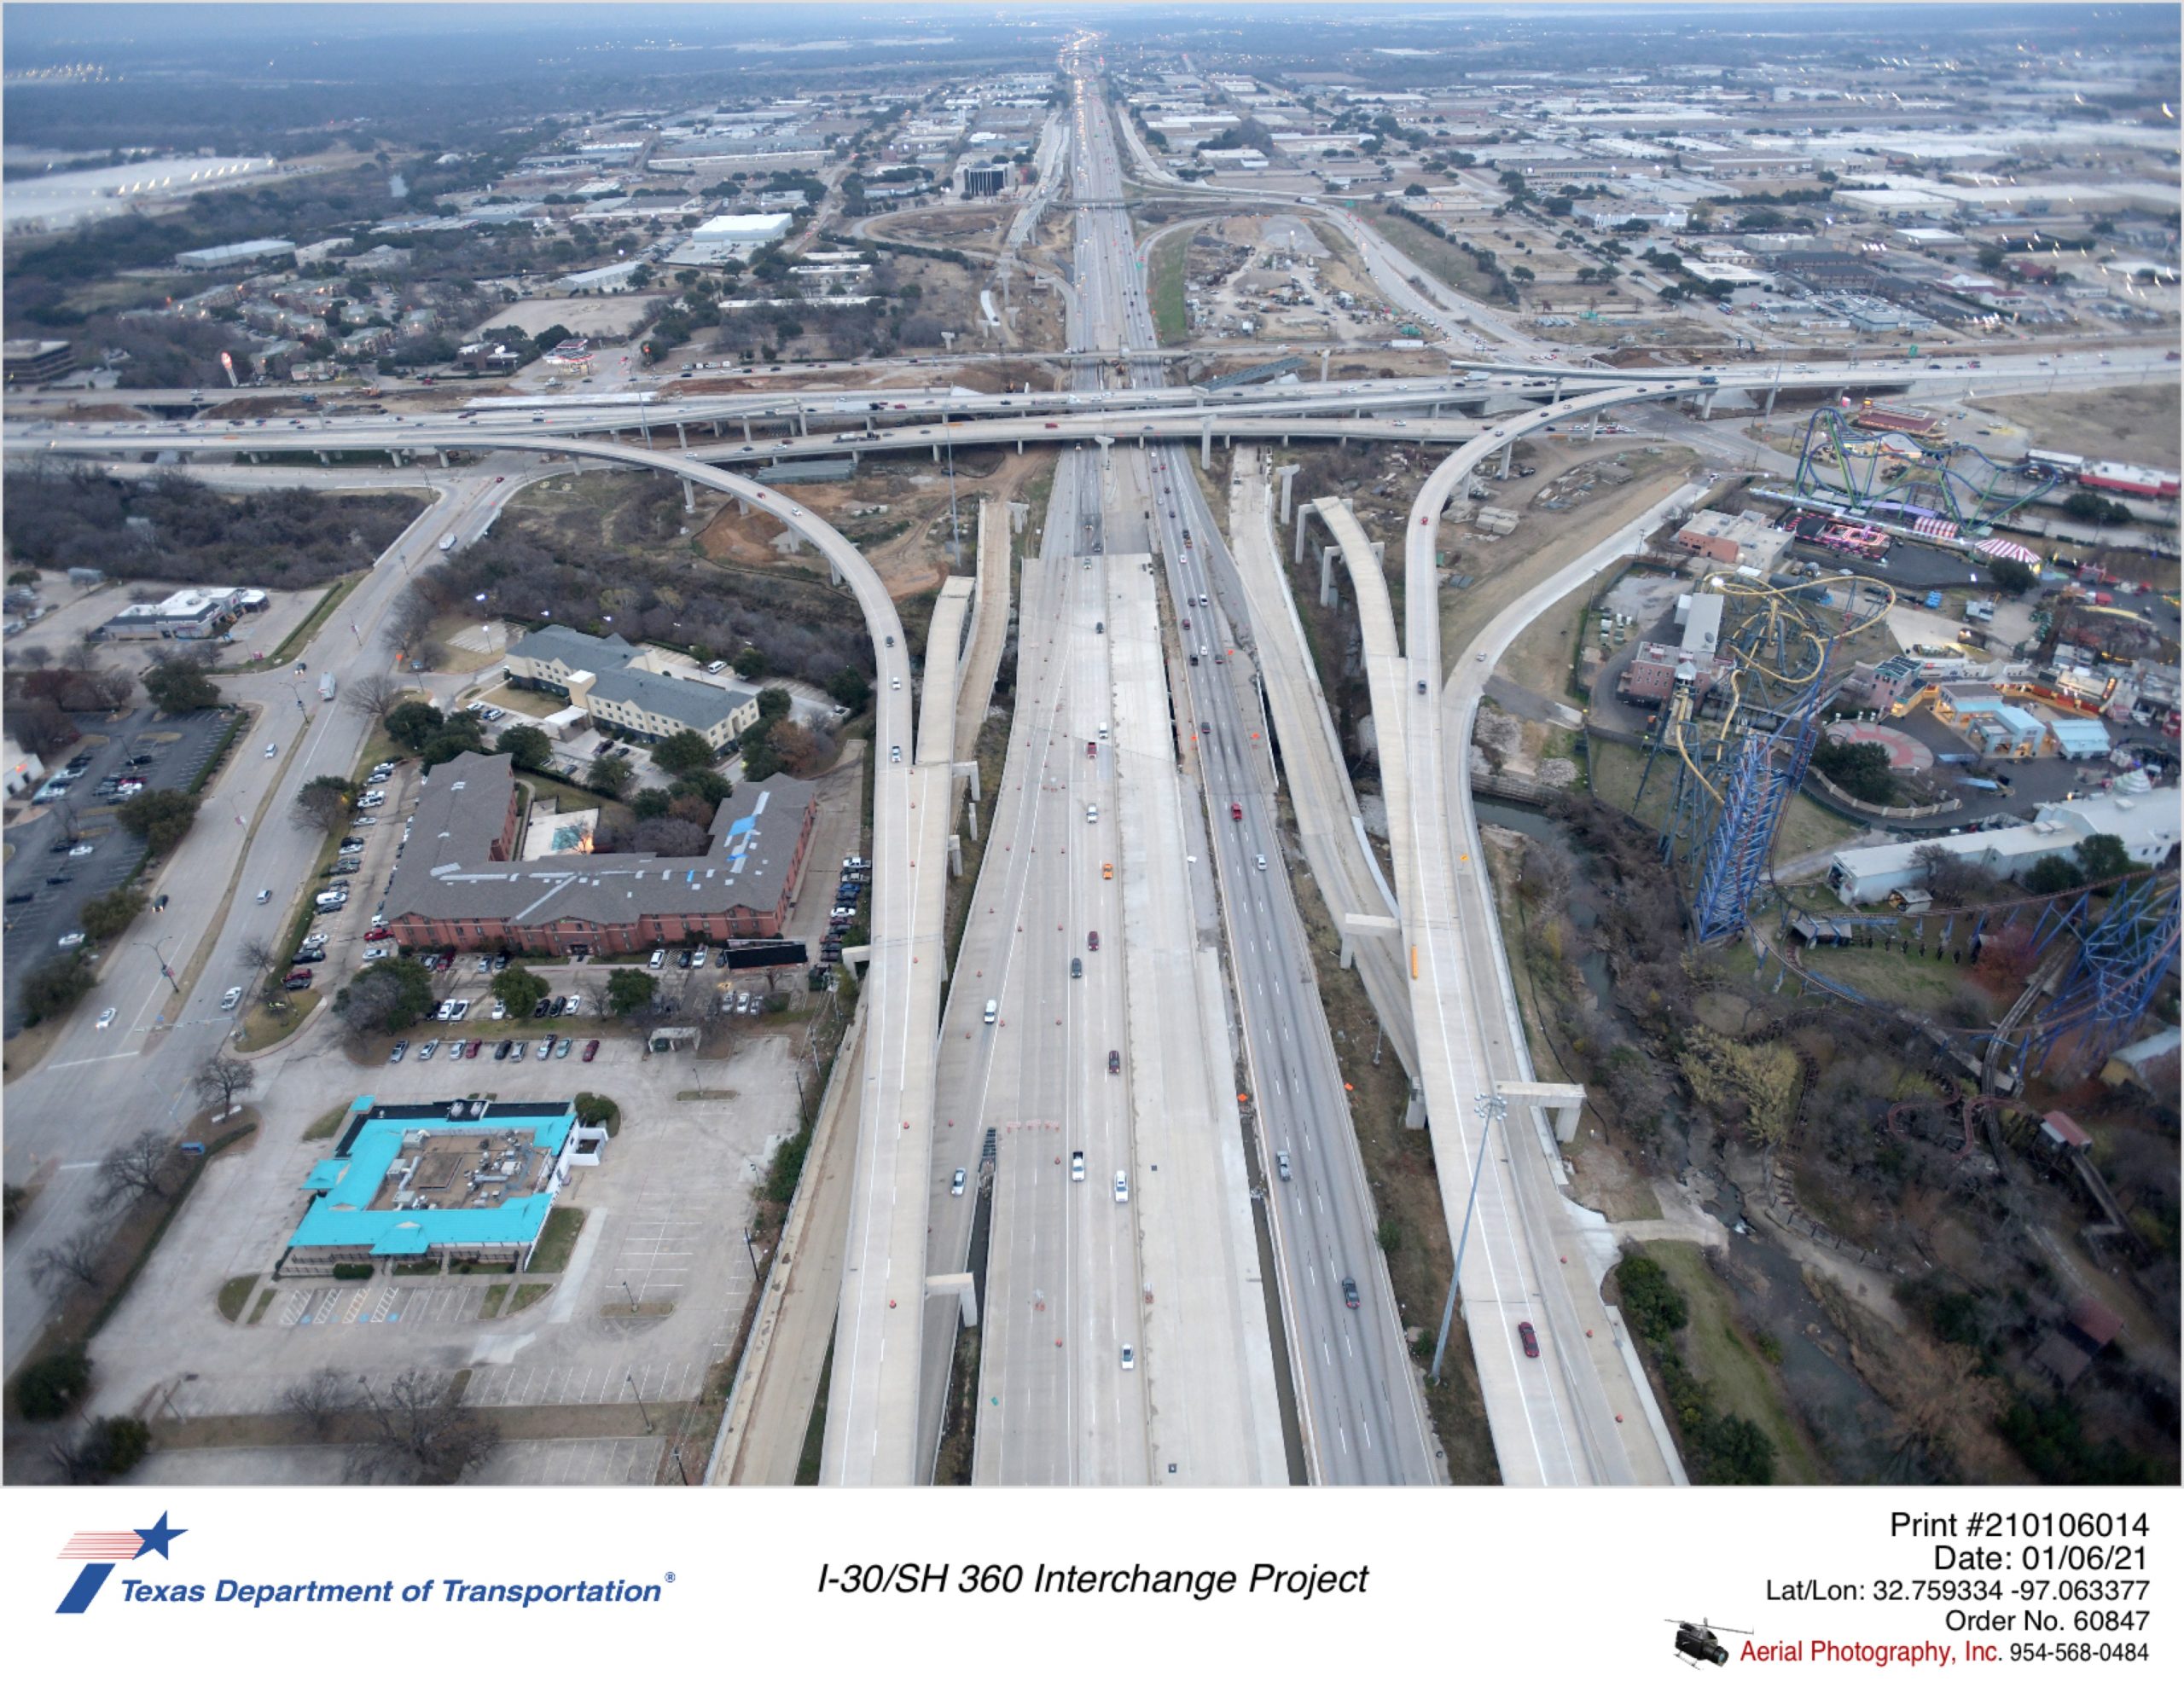 Over I-30 looking east with SH 360 interchange in mid-ground.